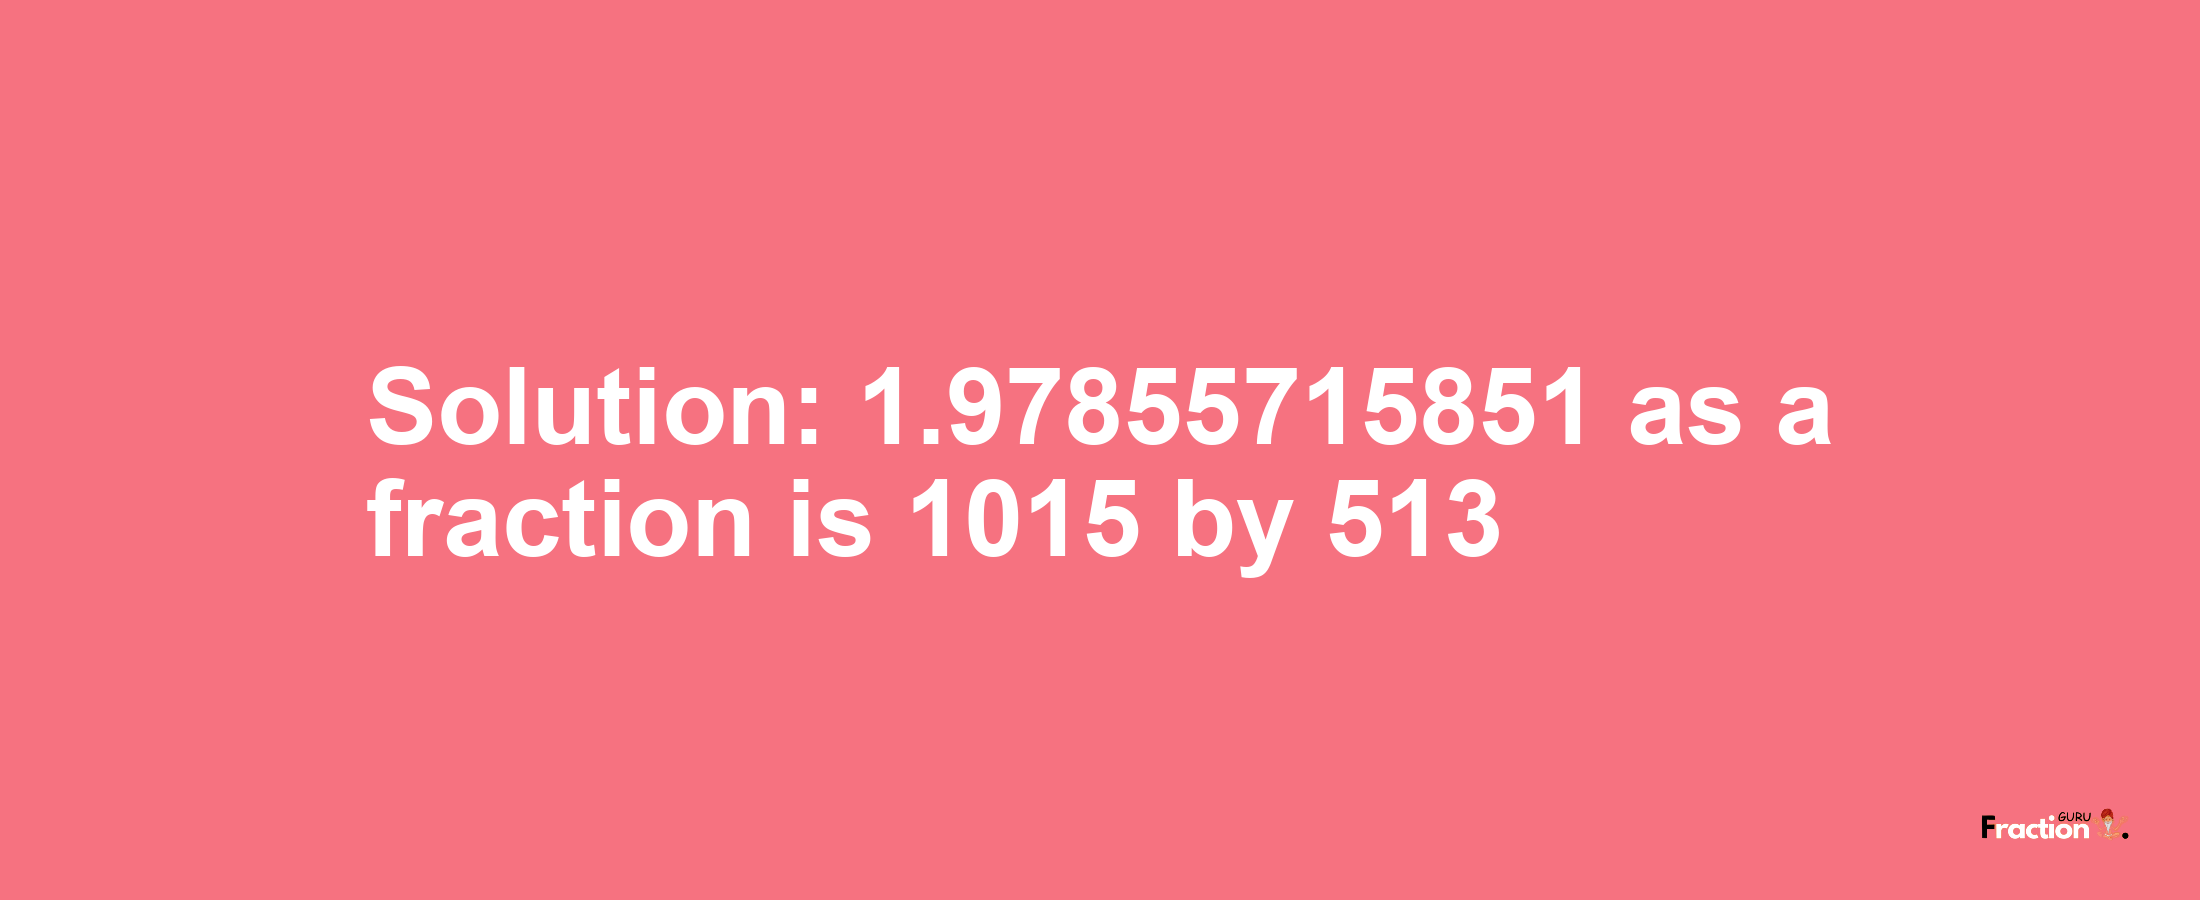 Solution:1.97855715851 as a fraction is 1015/513